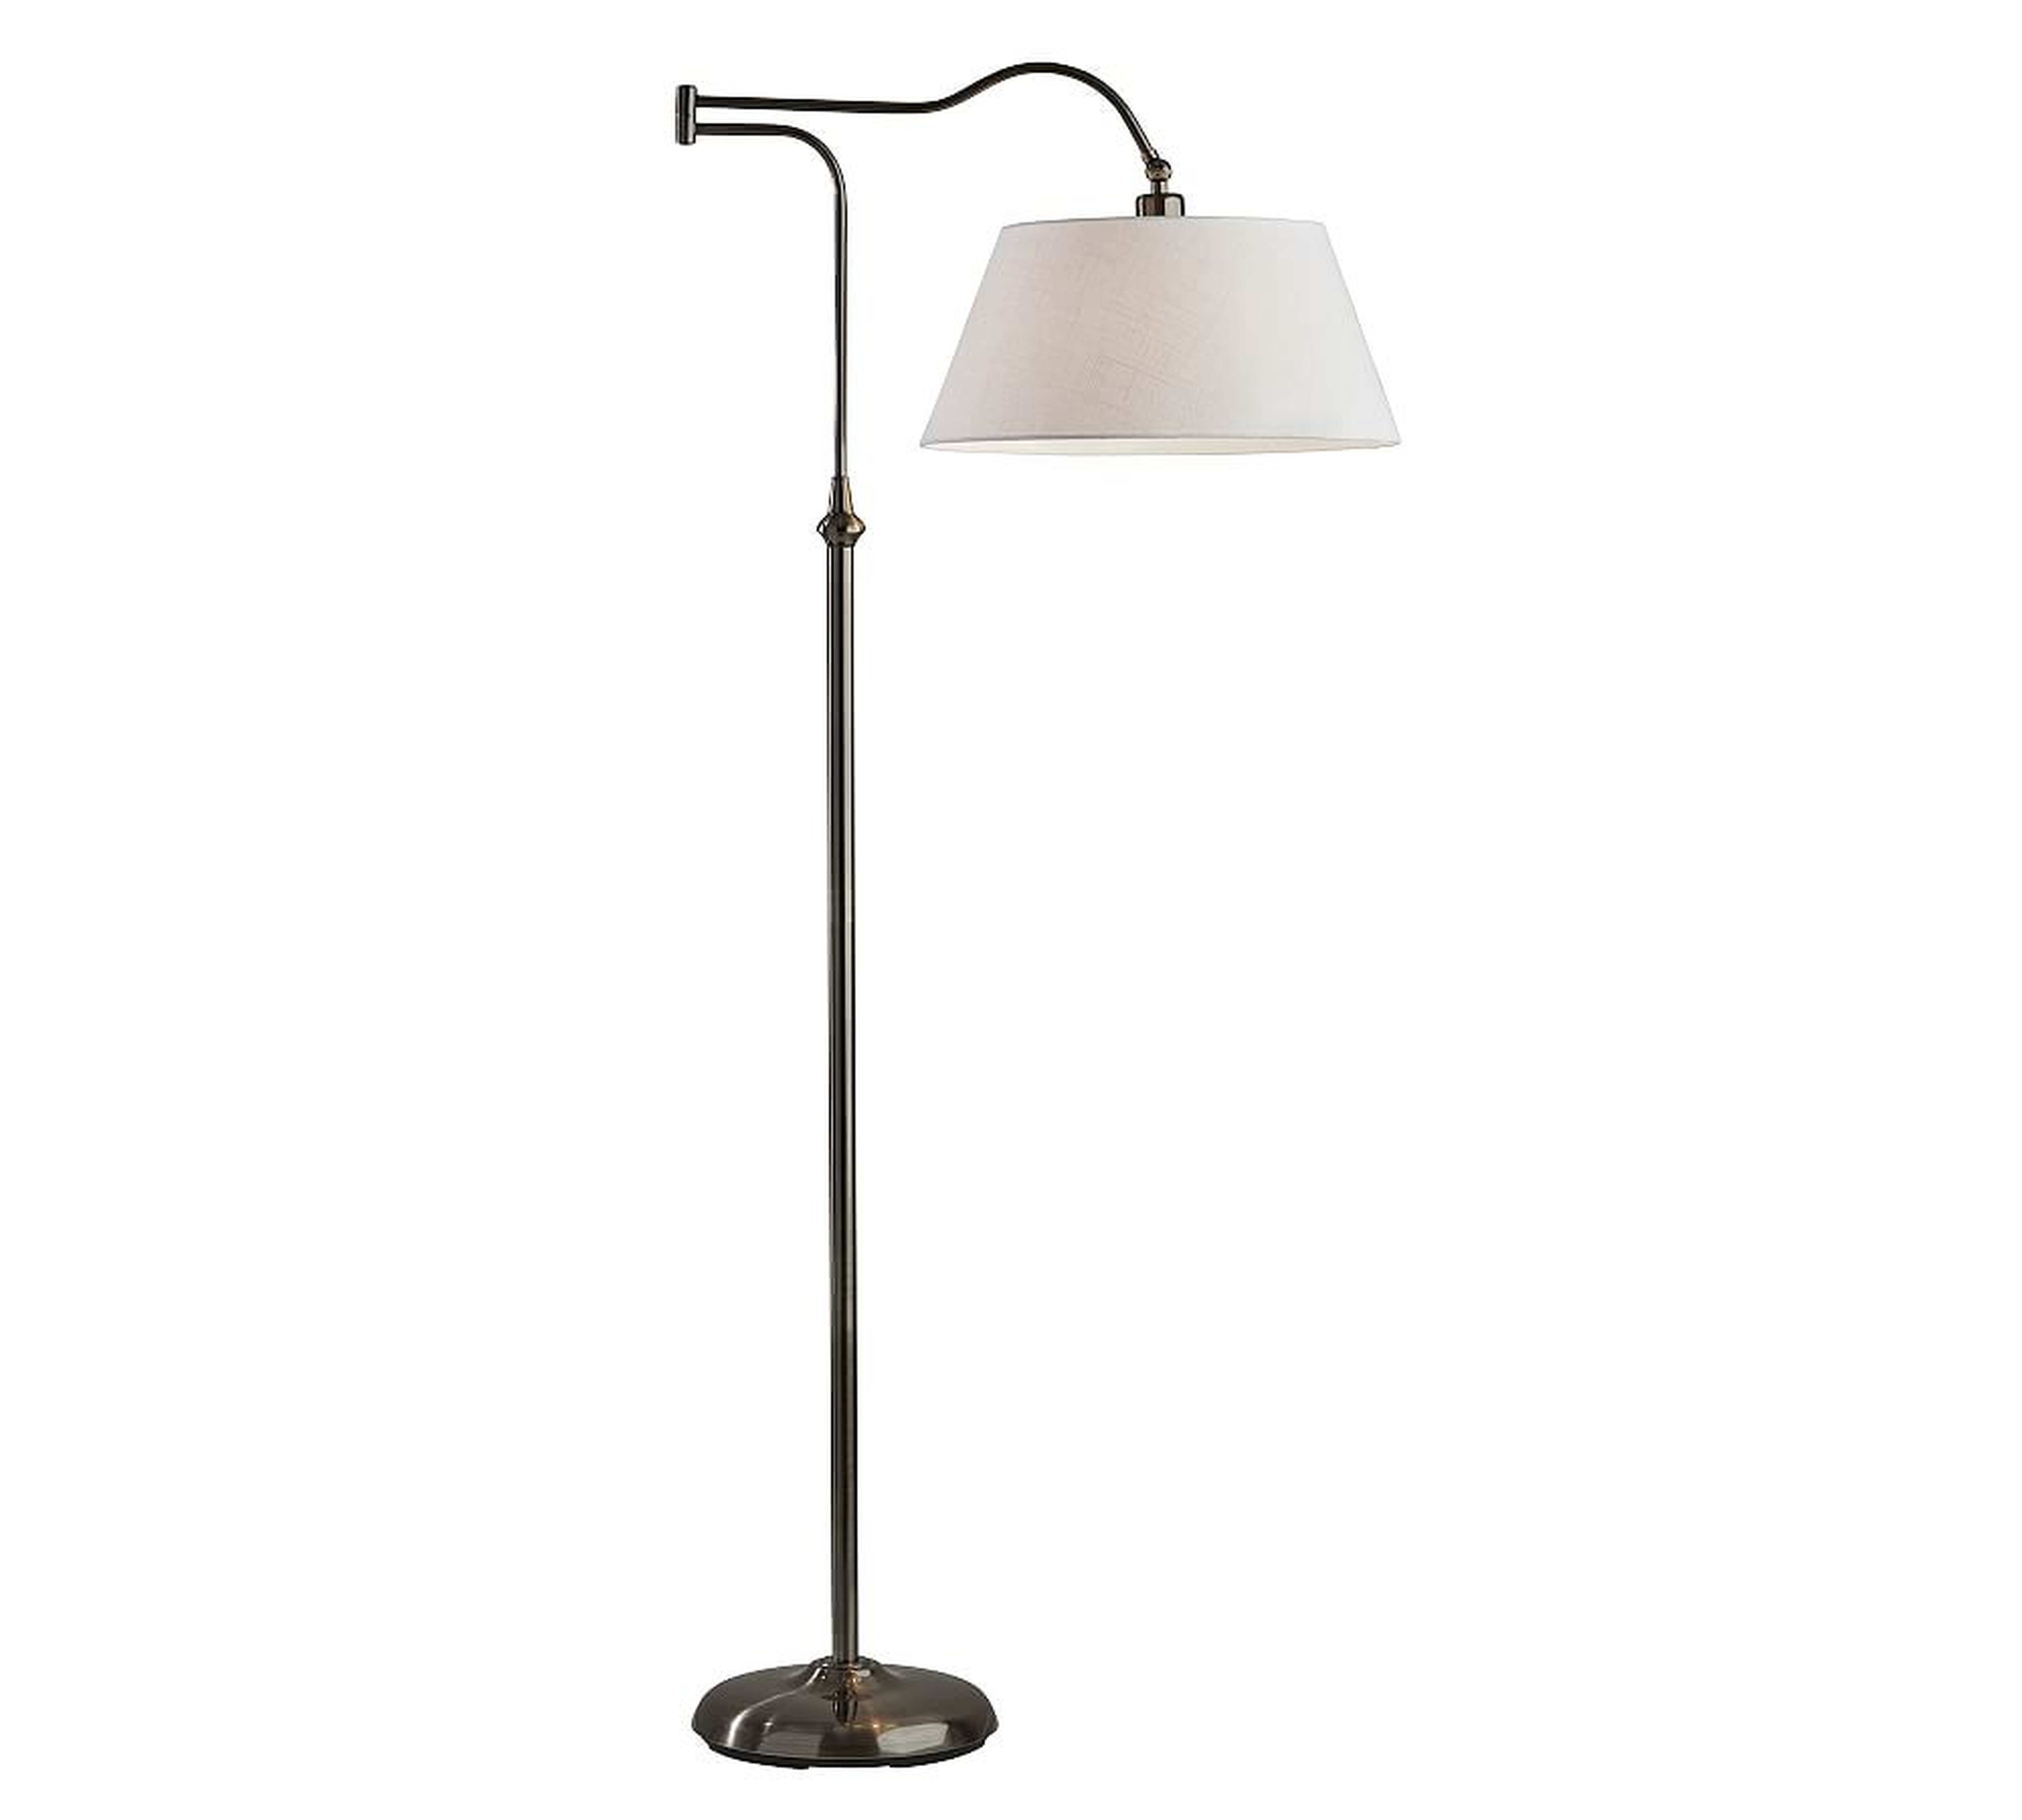 Downing Floor Lamp, Antique Pewter - Pottery Barn